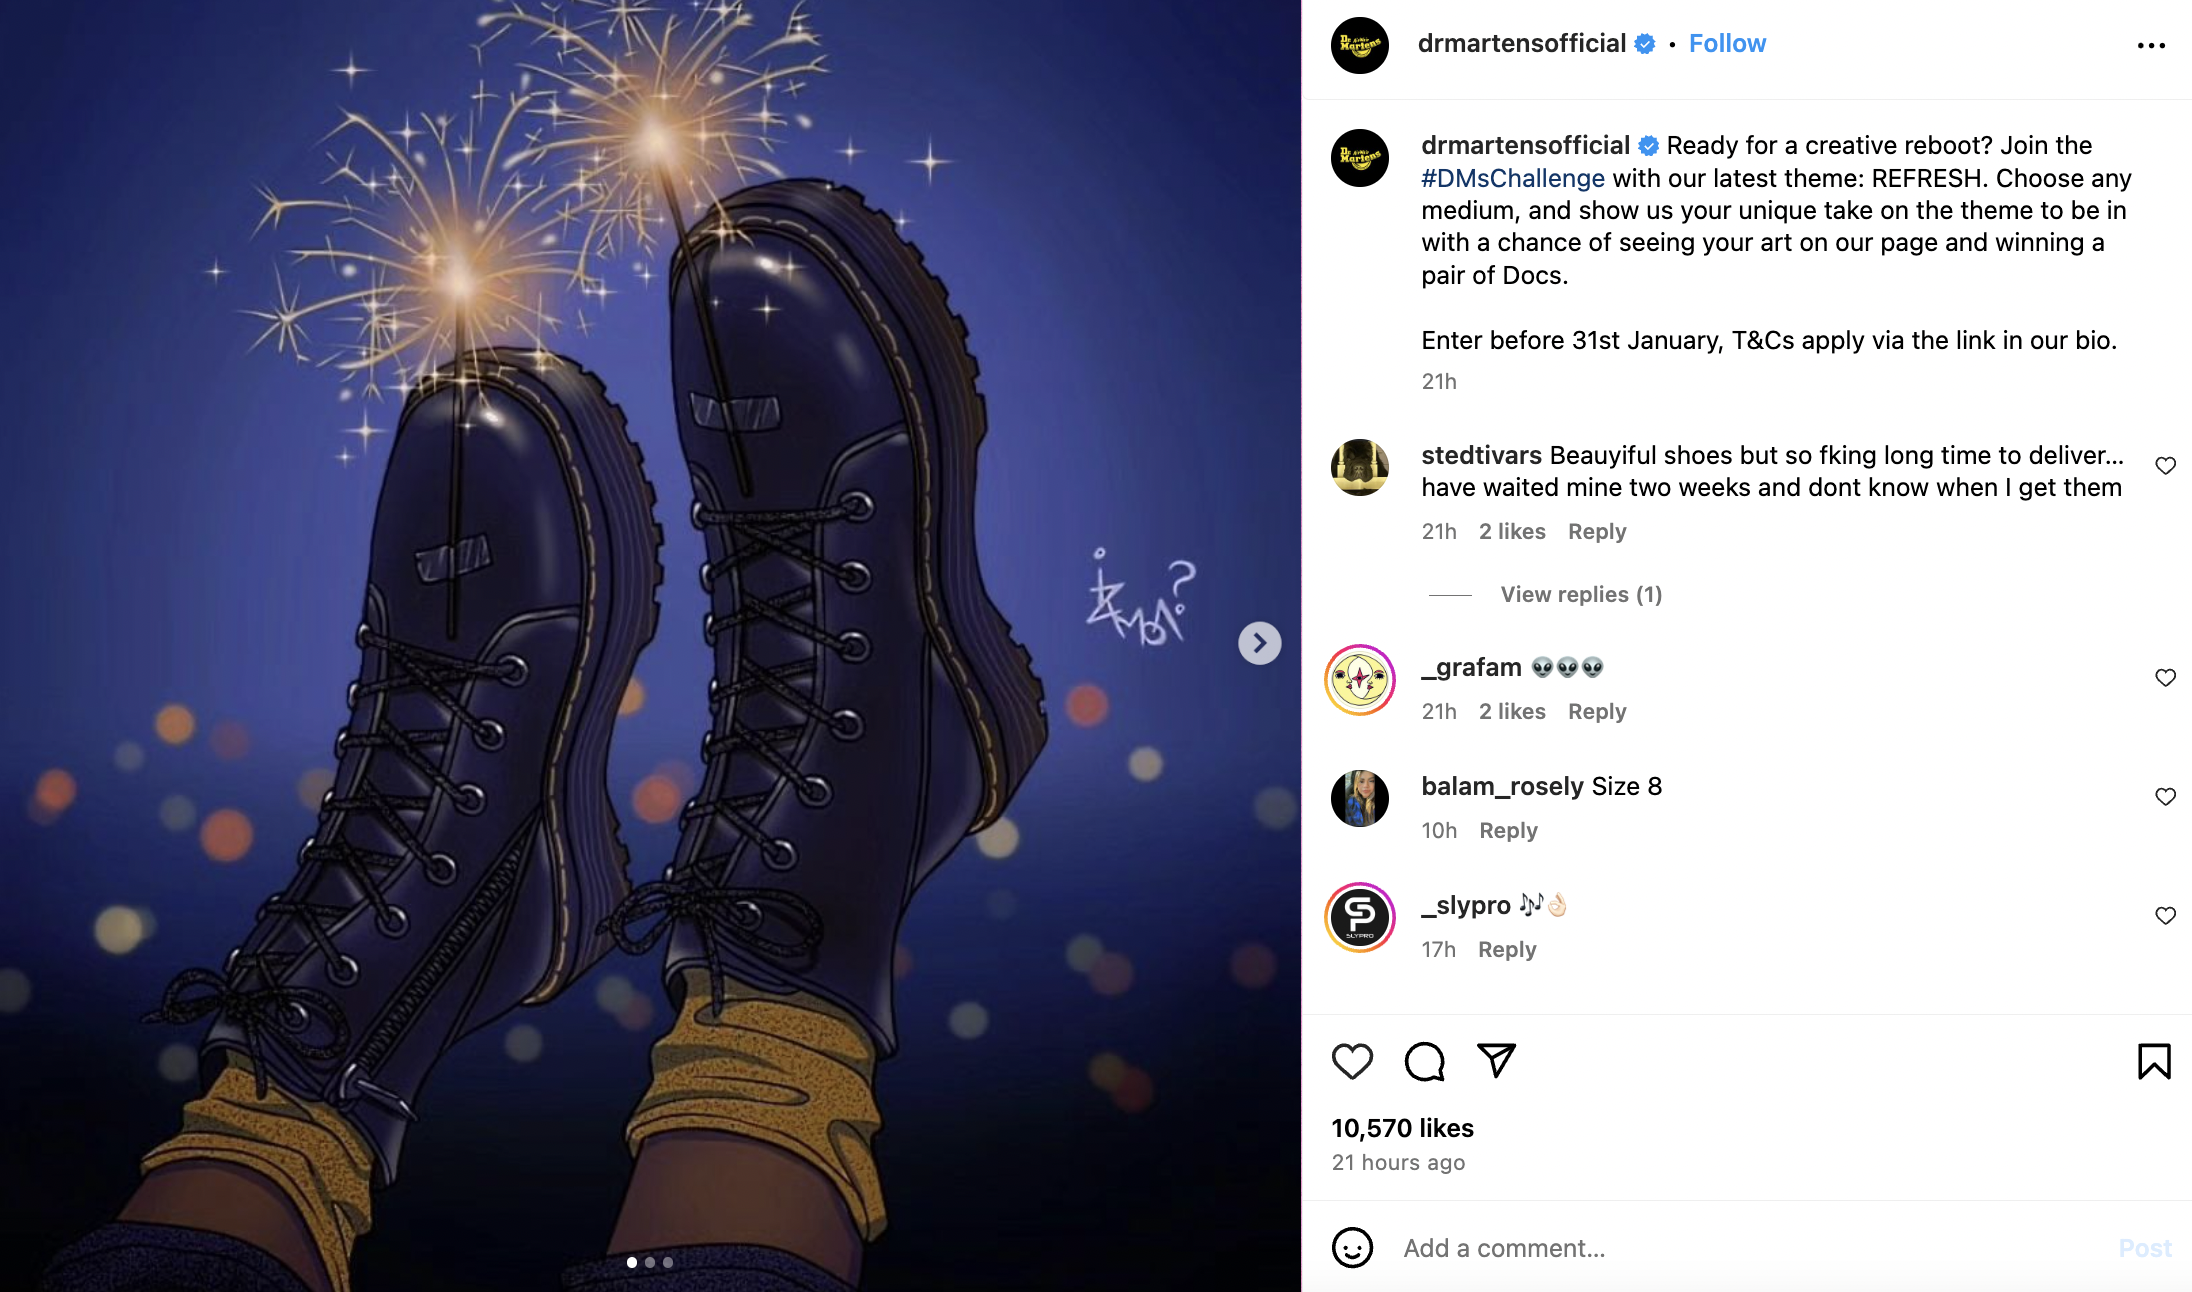 Instagram post of Dr Martens showing an art rendition of the shoes and requesting people to share their designs using the hashtag #DMsChallenge